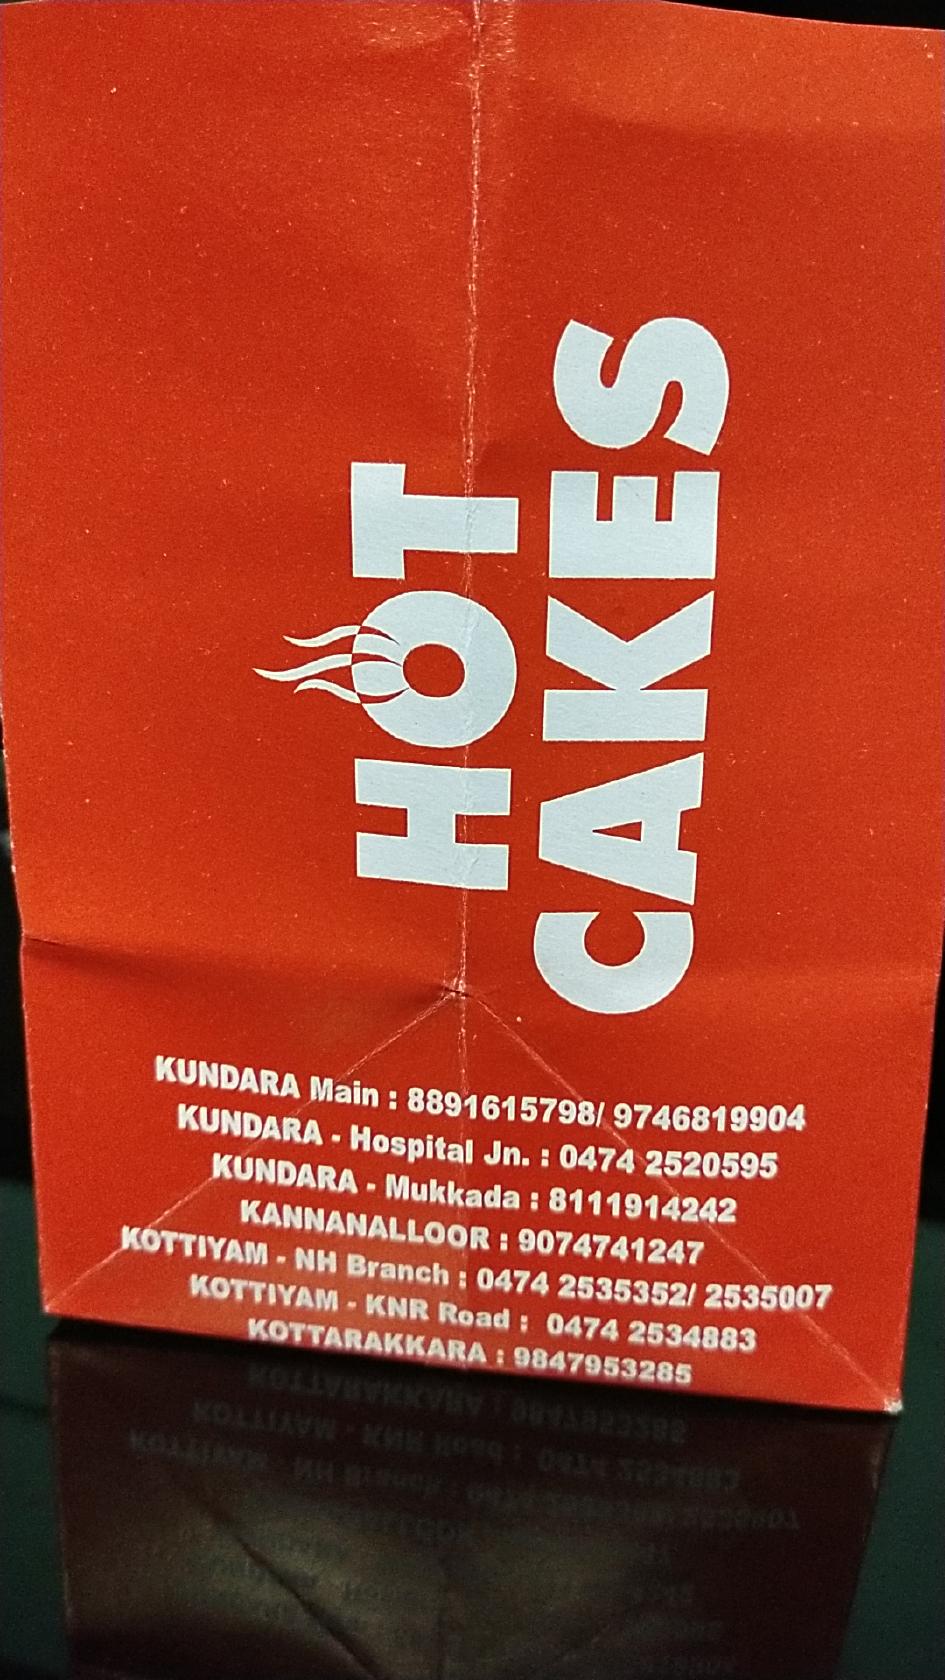 Hot Cakes (@hot_cakes_kerala) • Instagram photos and videos